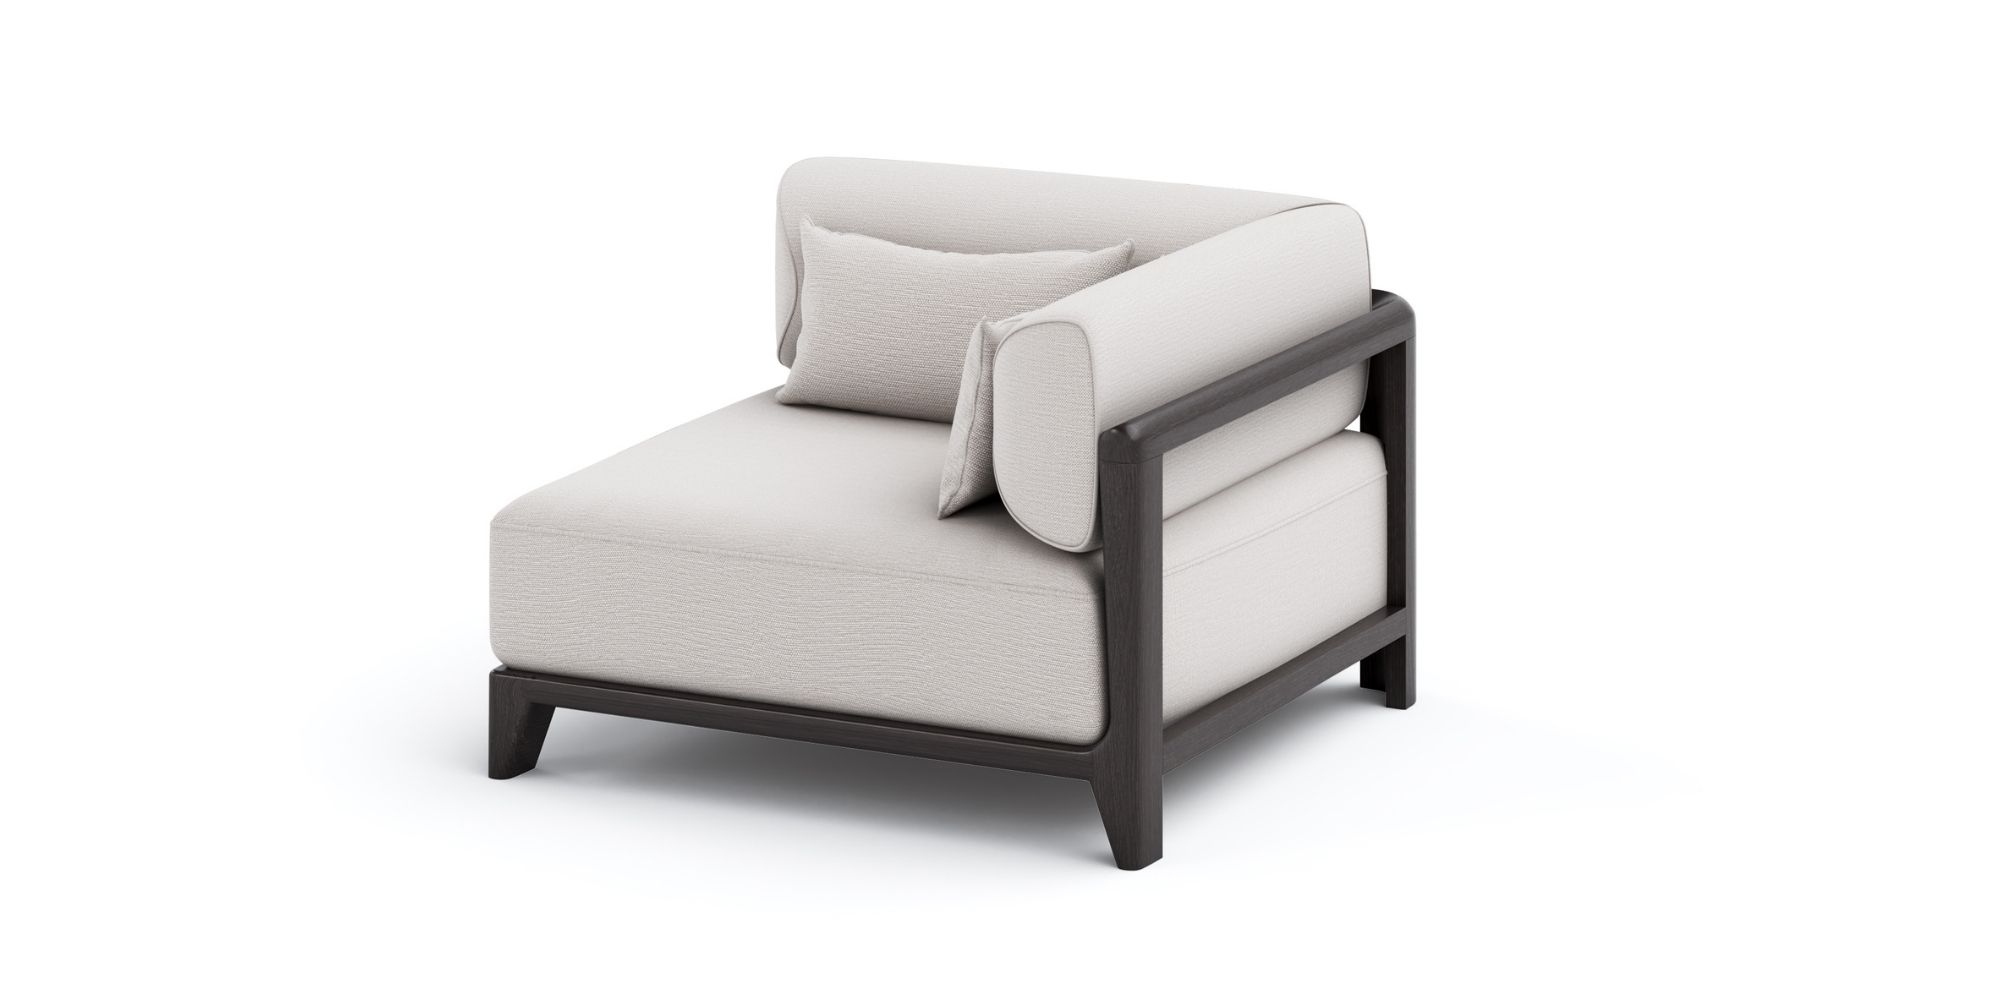 Tamarindo Lounger With Table in Outdoor Loungers for Tamarindo collection